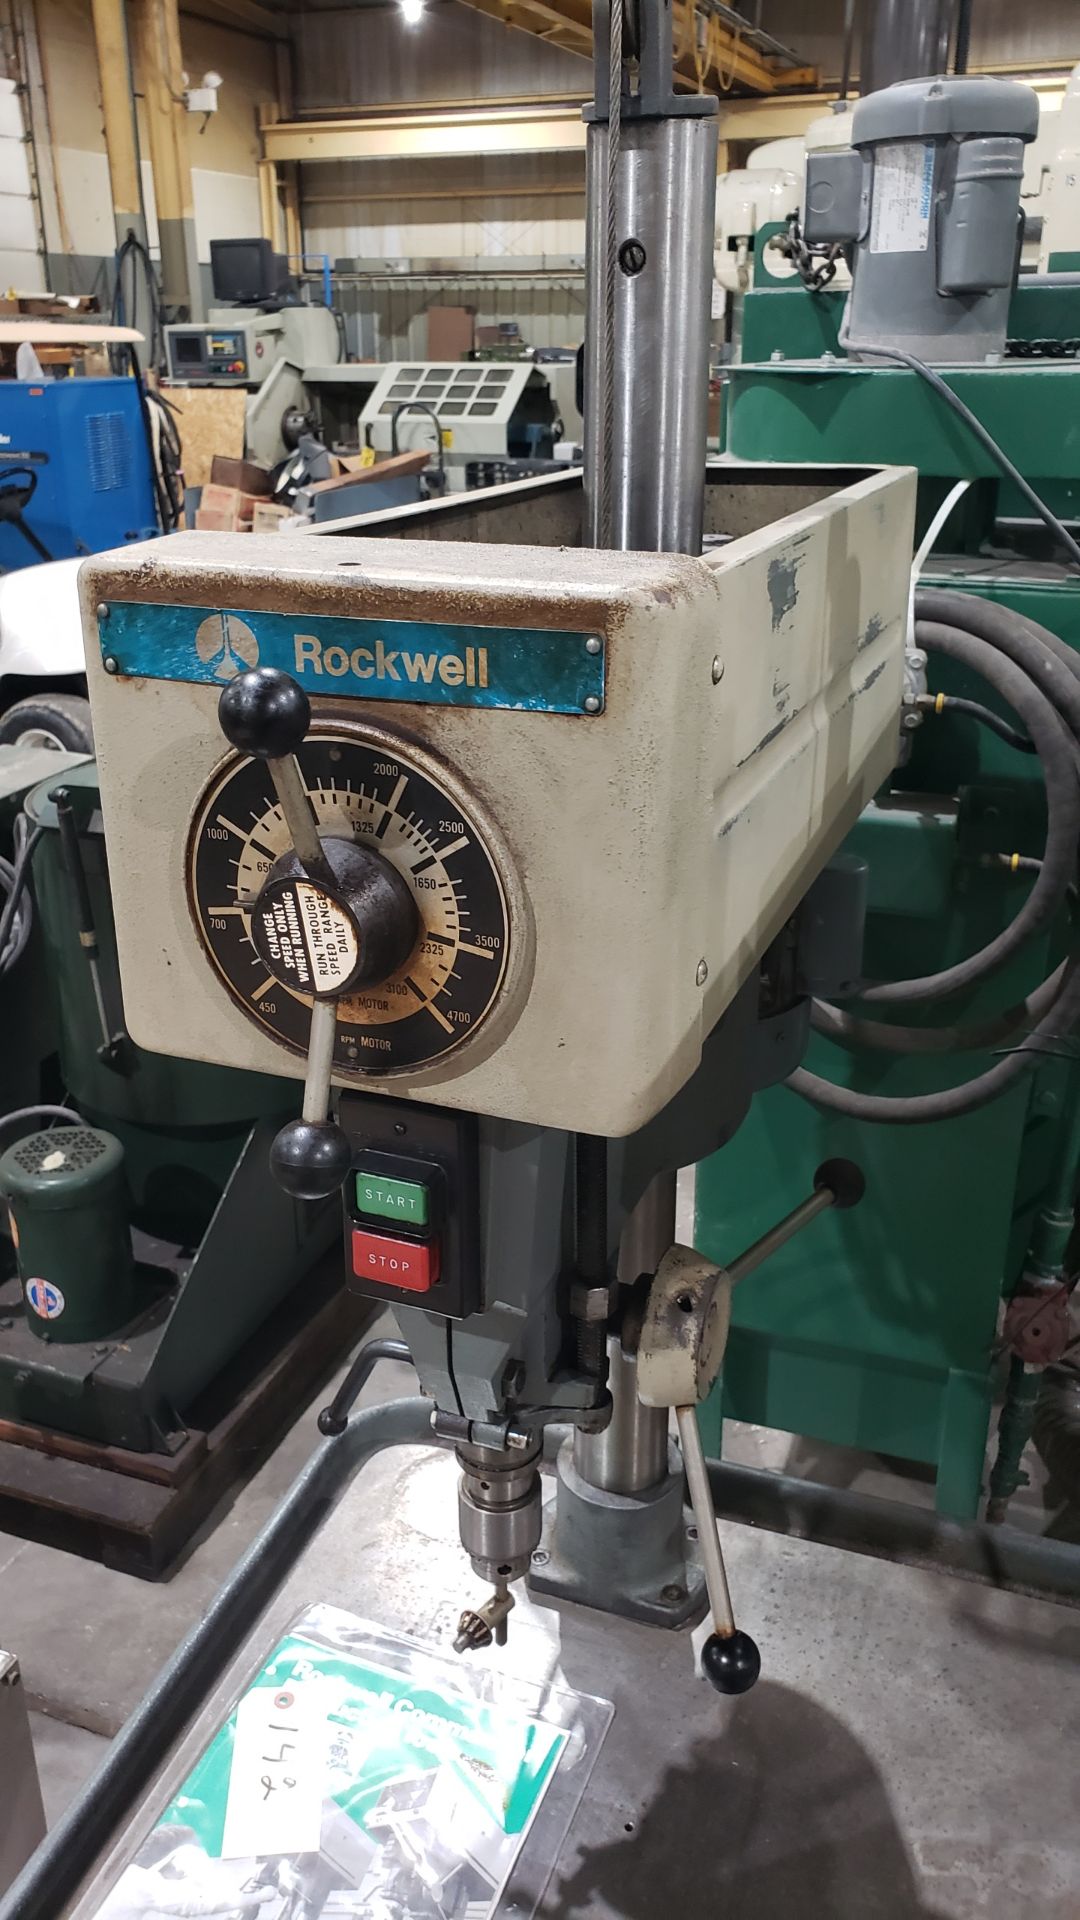 Rockwell 15 Inch Twin Spindle Drill Press, Variable Speed, Production Table, 110/1/60 AC, Loading - Image 3 of 4